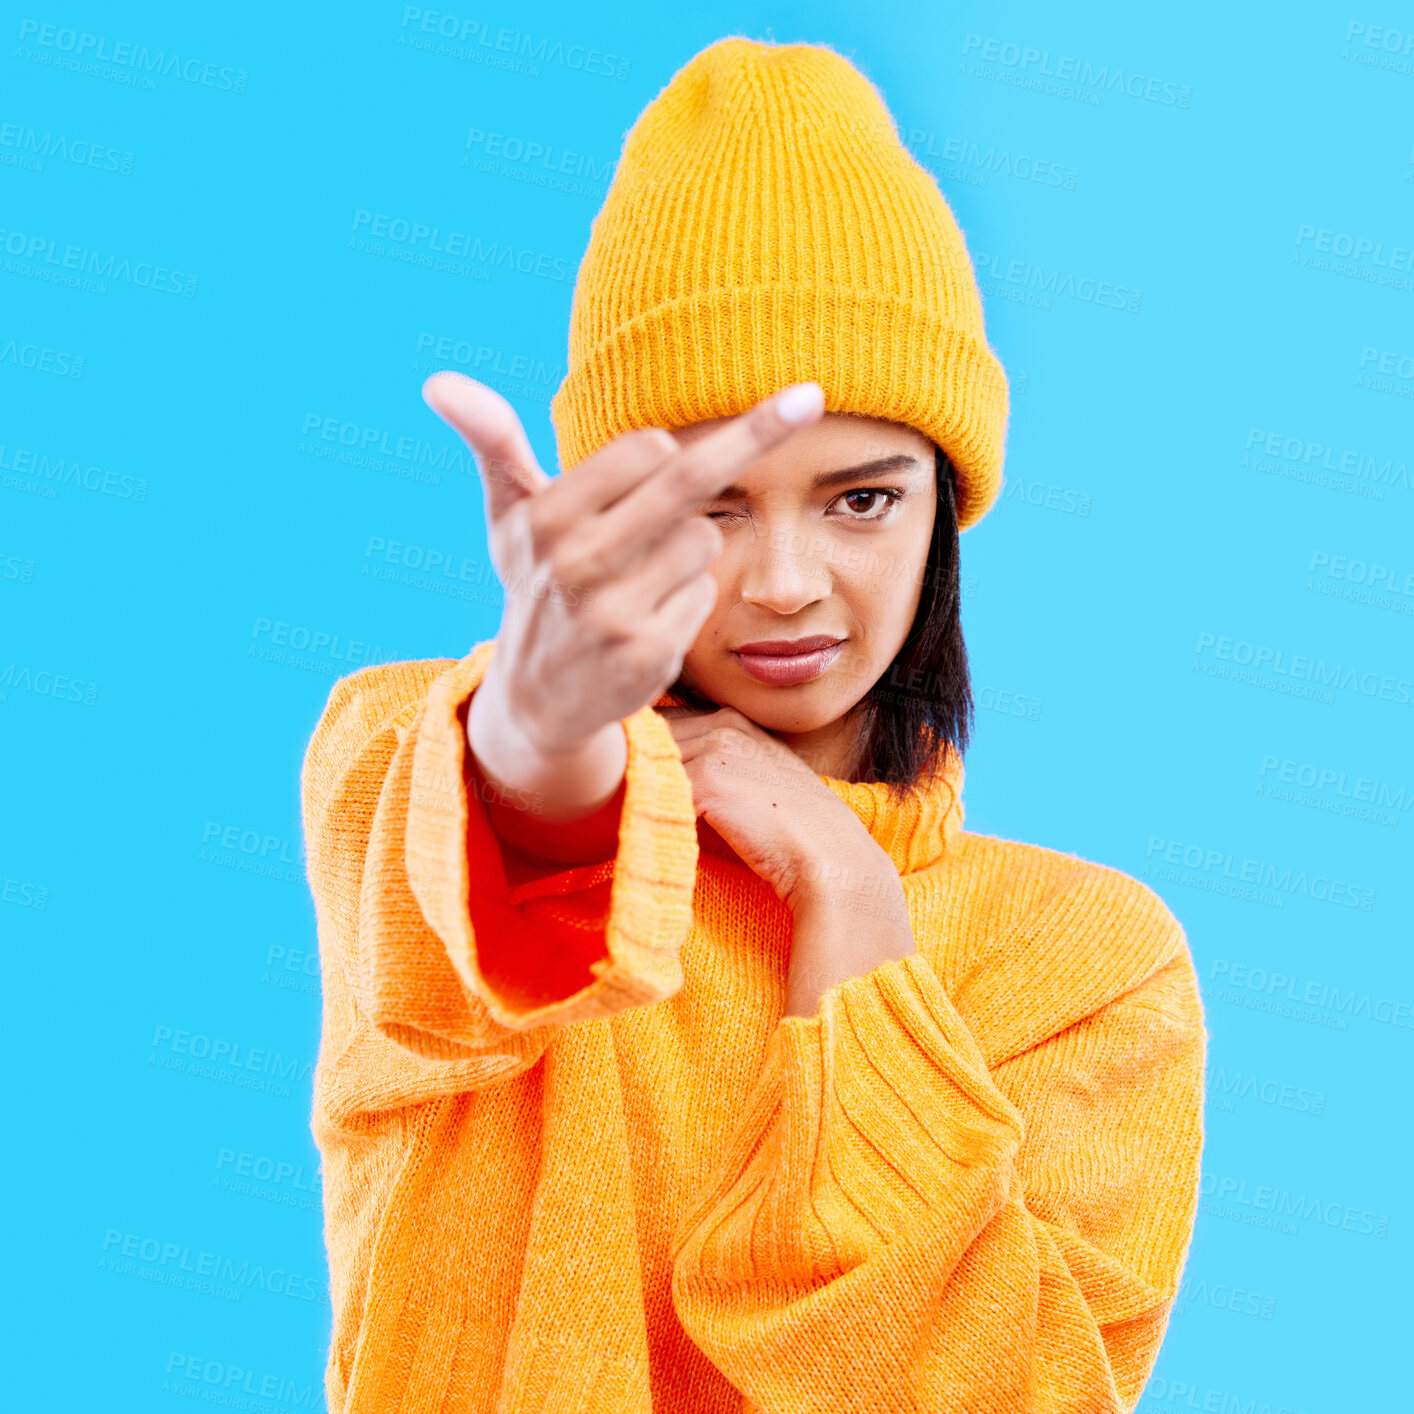 Buy stock photo Portrait, hand gesture and rude with a woman on a blue background in studio wearing a yellow beanie or outfit. Emoji, angry and insult with an attractive young female showing the middle finger